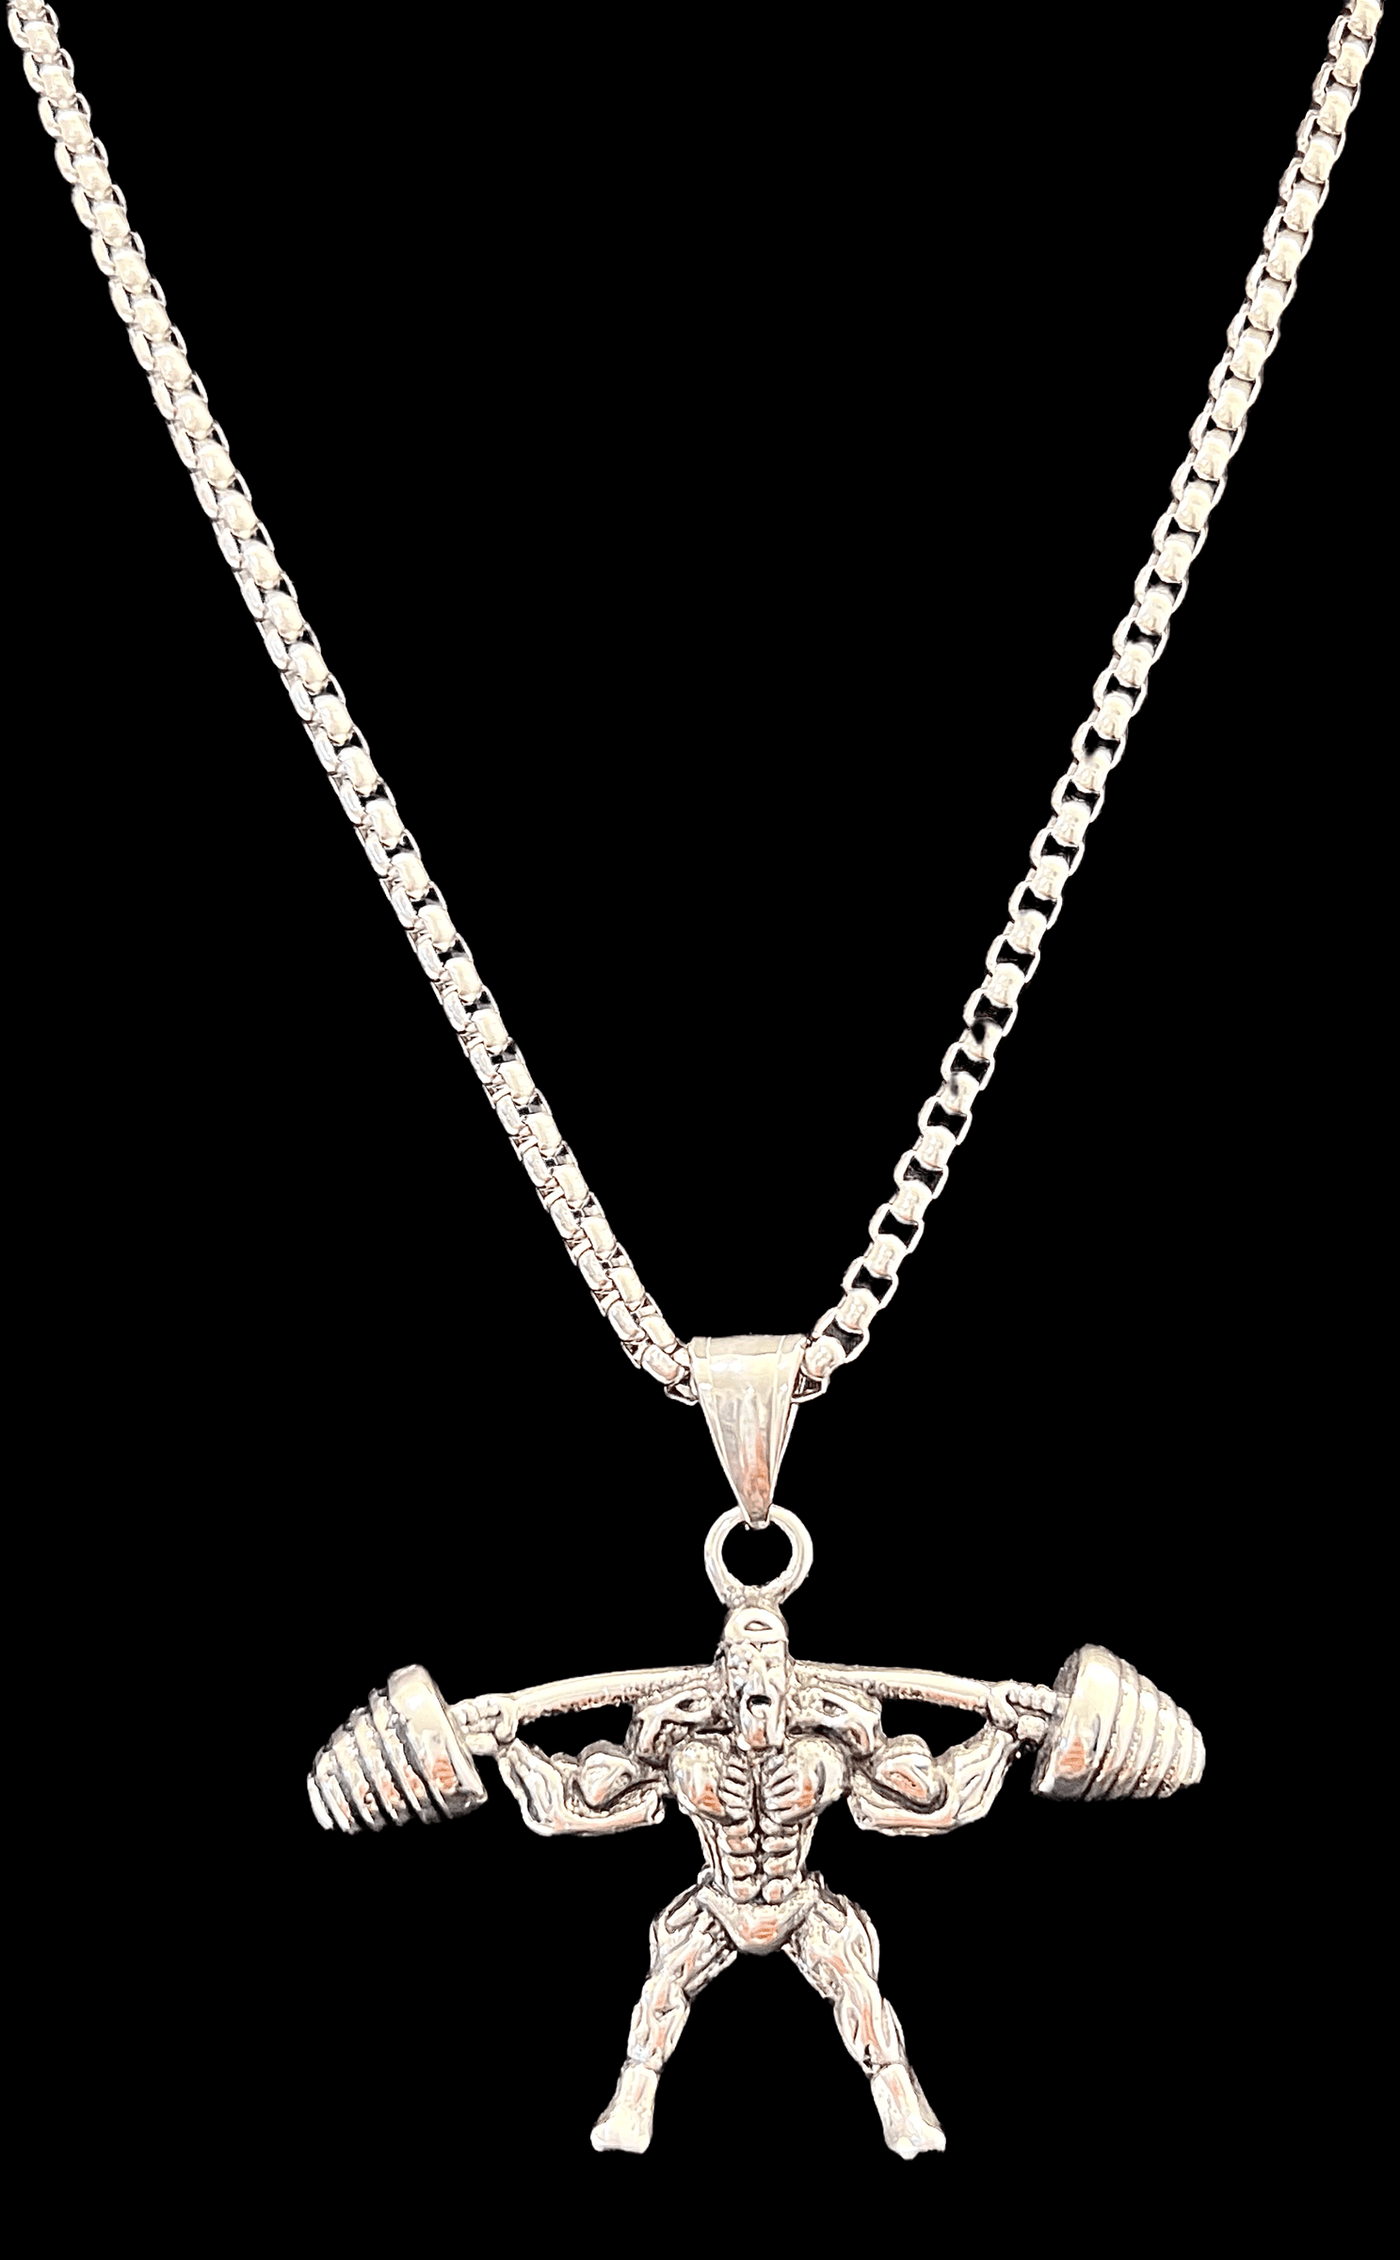 Squatting bodybuilder Muscle Man Stainless Steel with Silver Stainless Steel chain - Brent's Bling